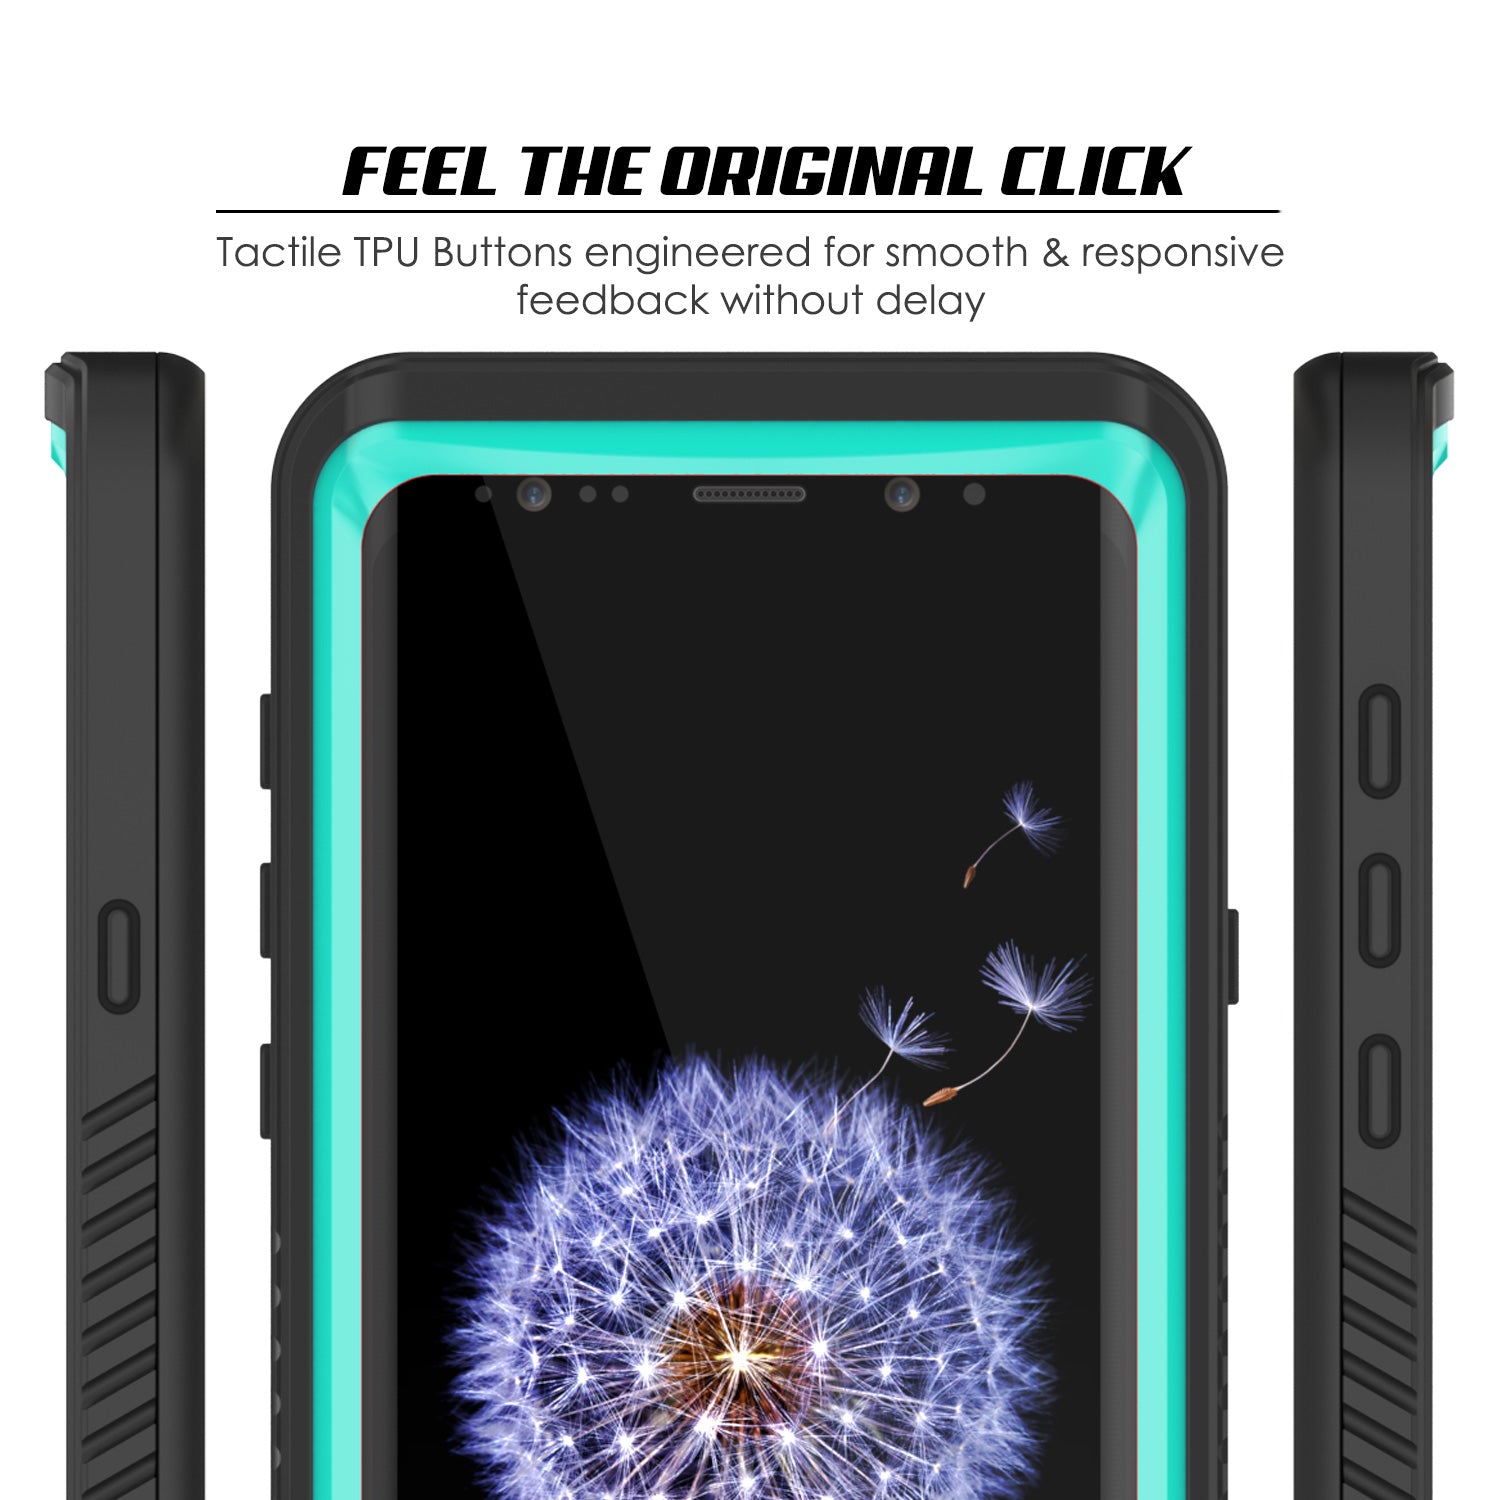 Galaxy S9 Waterproof Case, Punkcase [Extreme Series] [Slim Fit] [IP68 Certified] [Shockproof] [Snowproof] [Dirproof] Armor Cover W/ Built In Screen Protector for Samsung Galaxy S9 [Teal] - PunkCase NZ